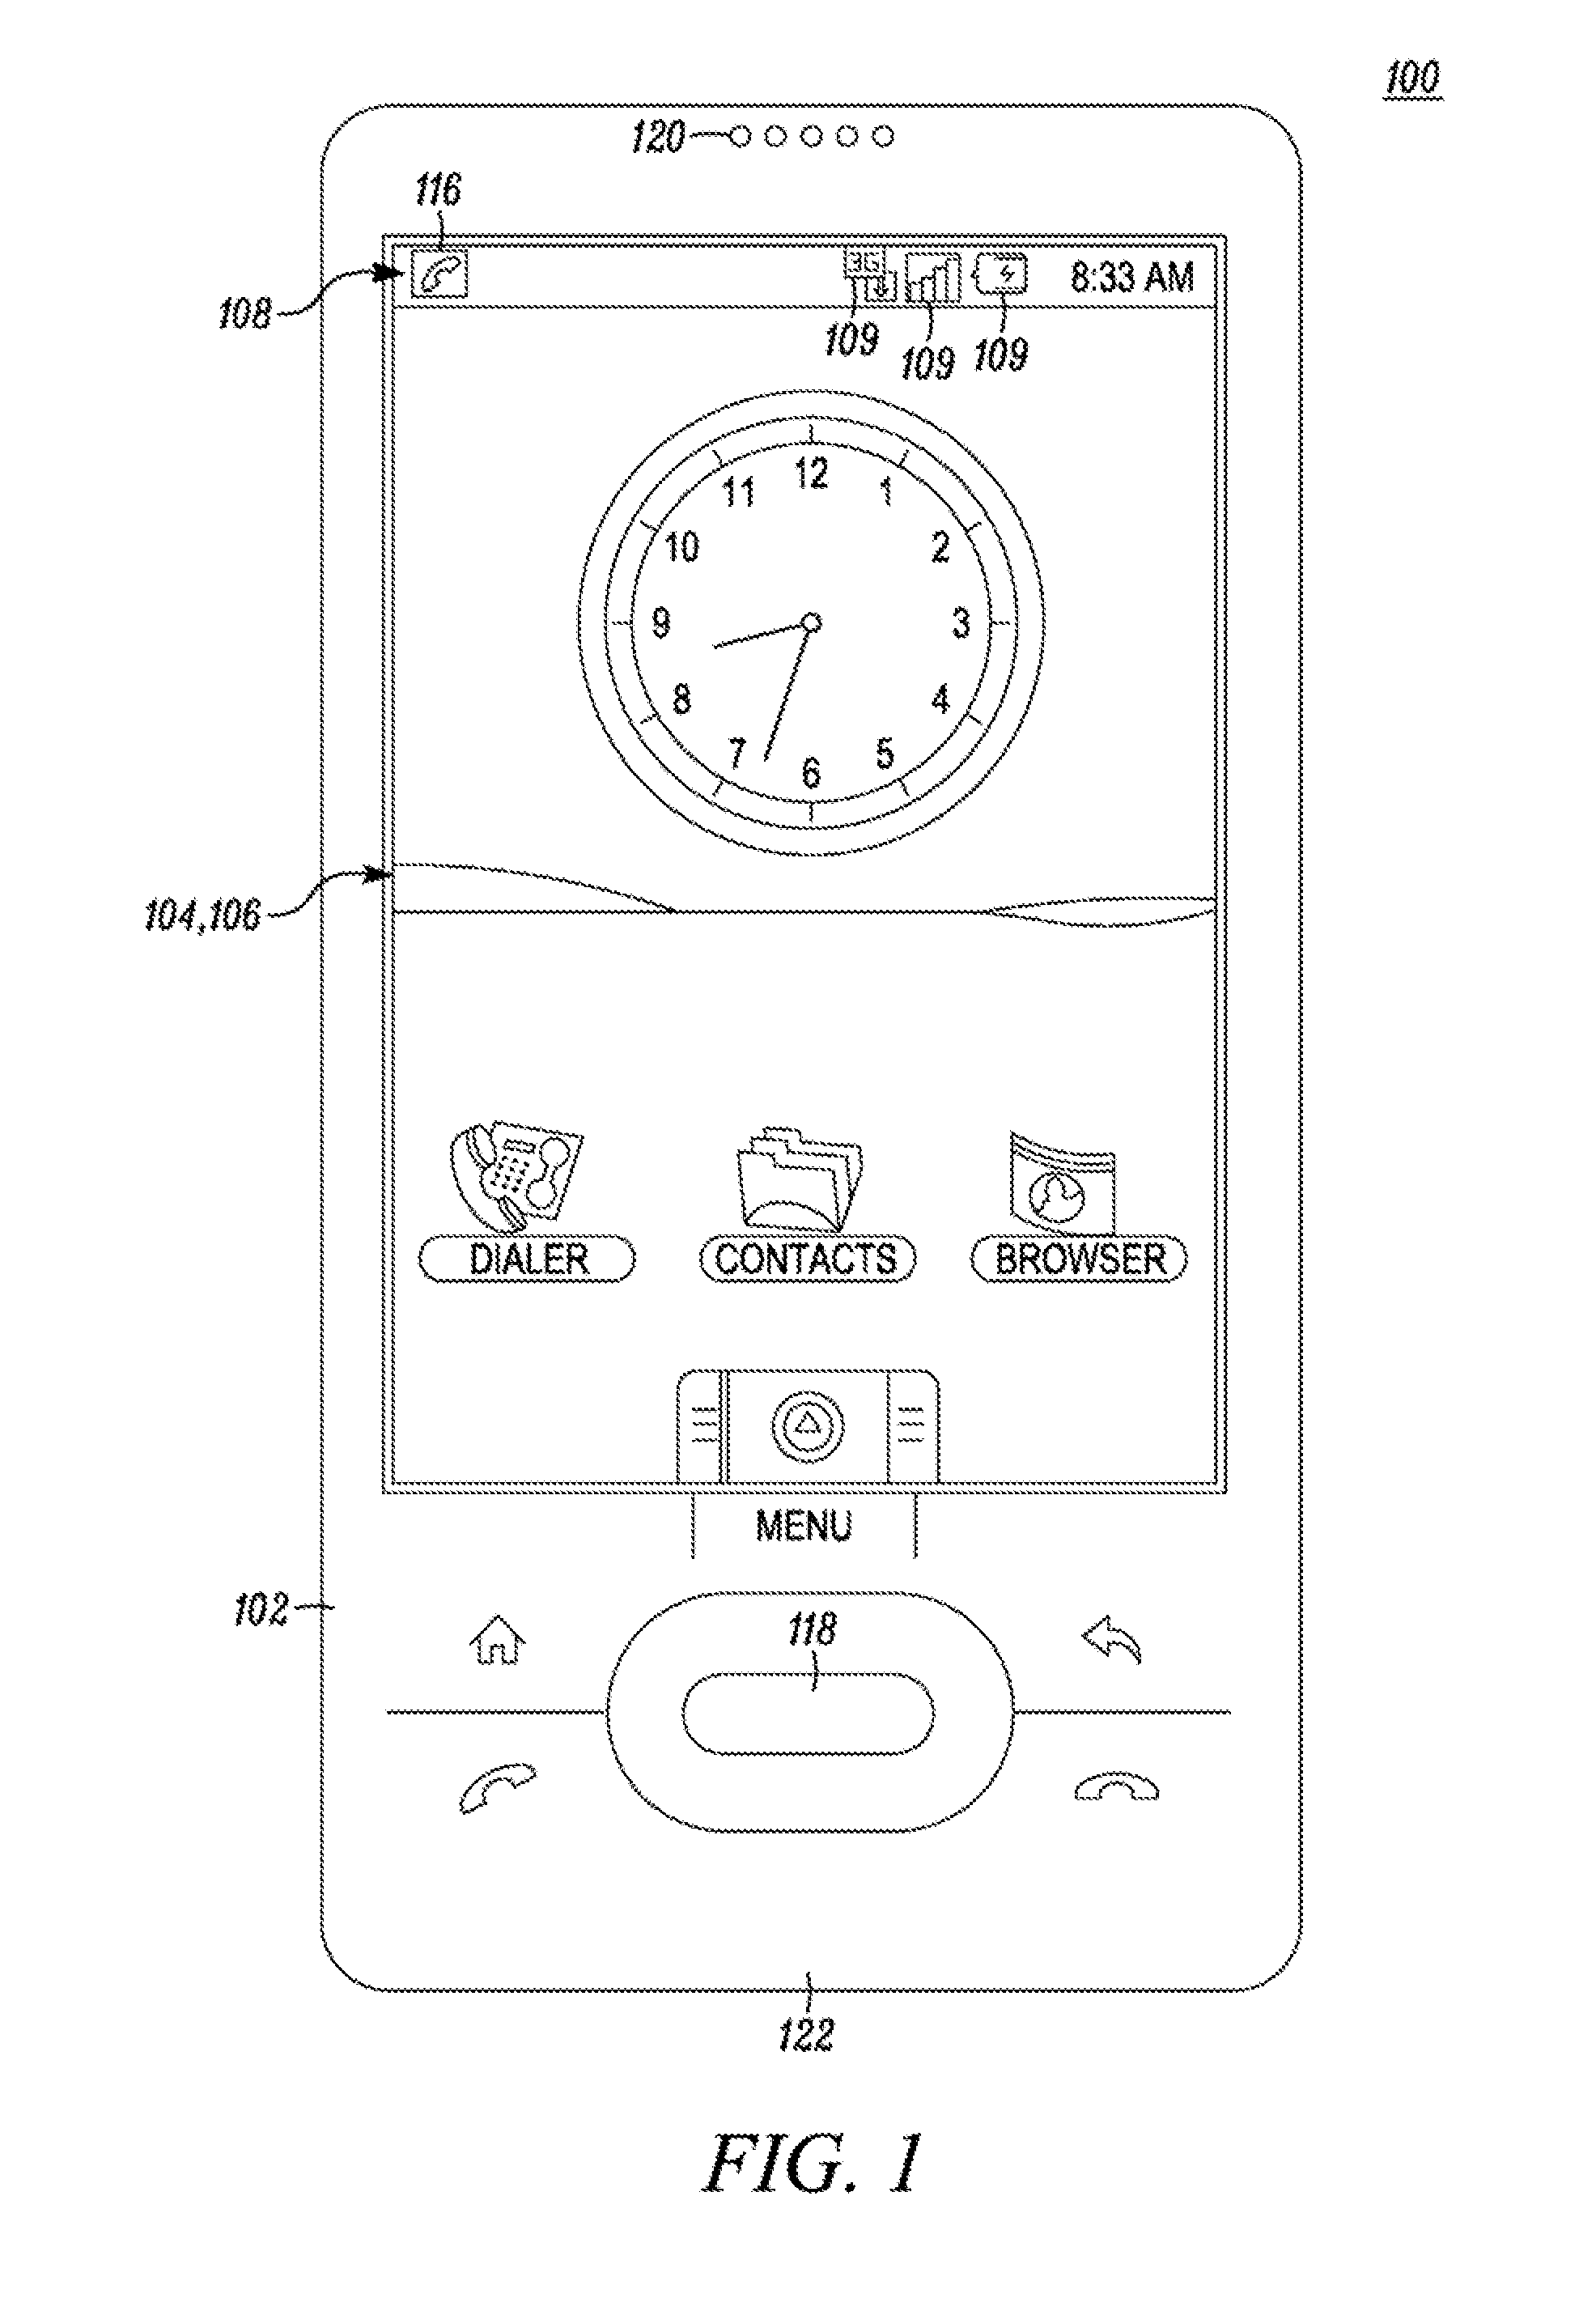 Method of a Wireless Communication Device for Managing Status Components for Global Call Control